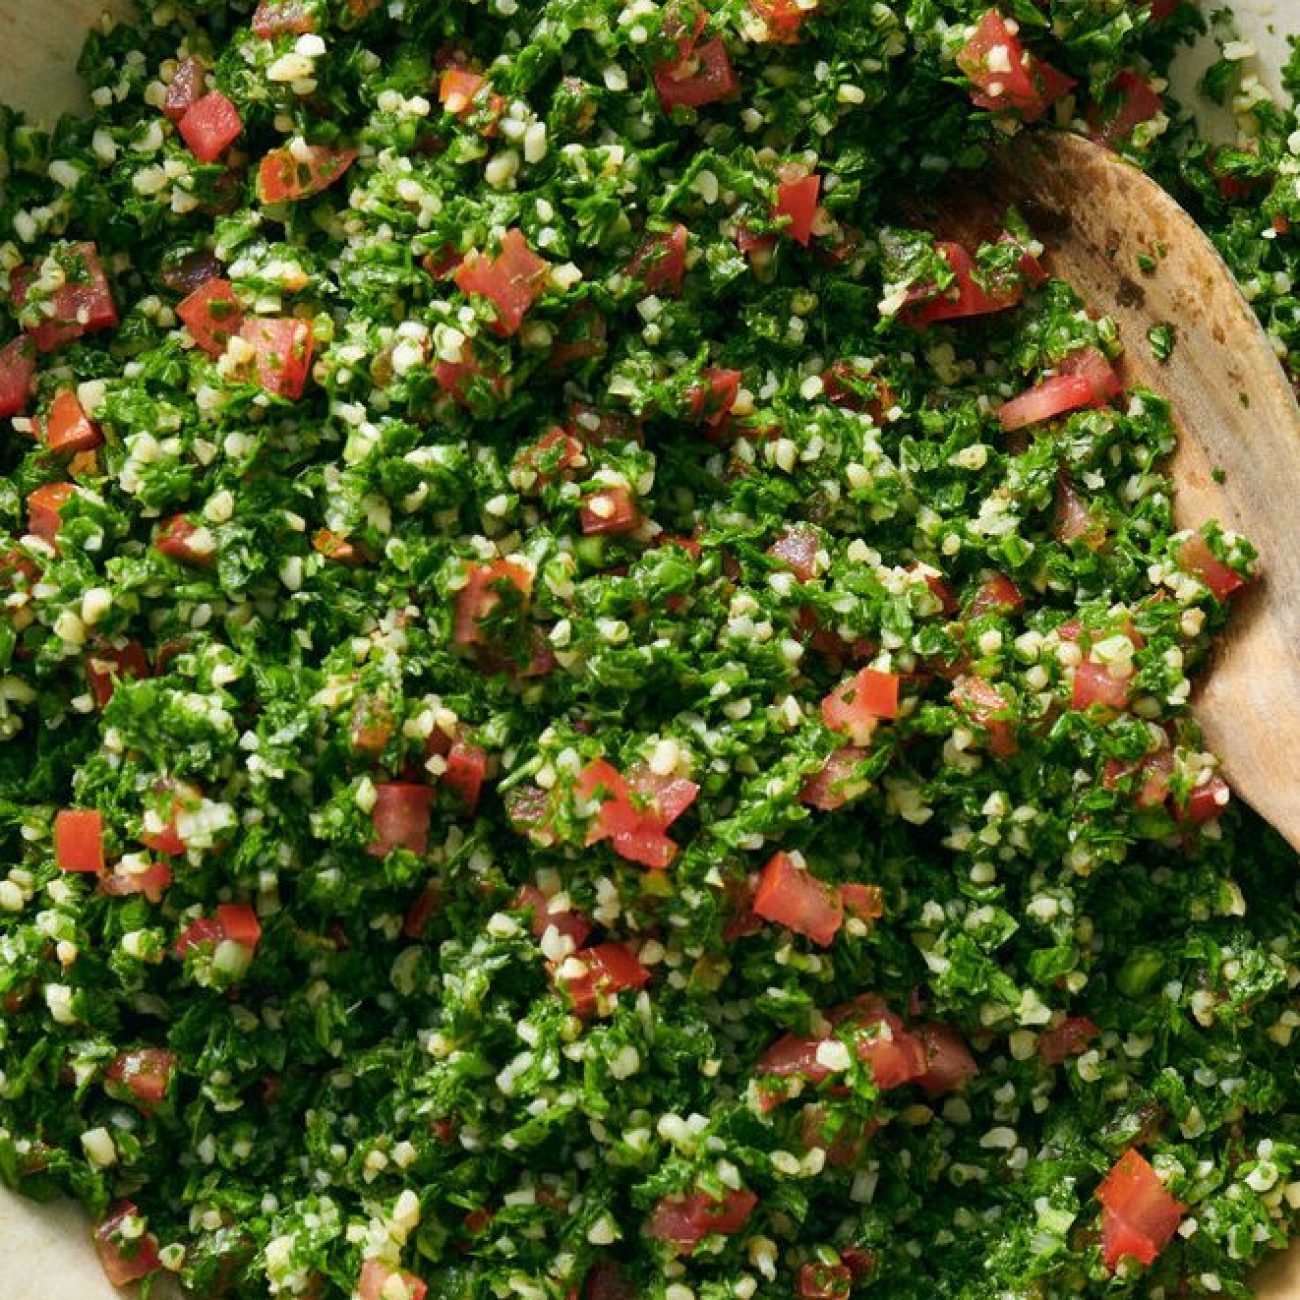 Authentic Lebanese Tabbouleh Salad Recipe: A Refreshing Parsley and Bulgur Wheat Delight